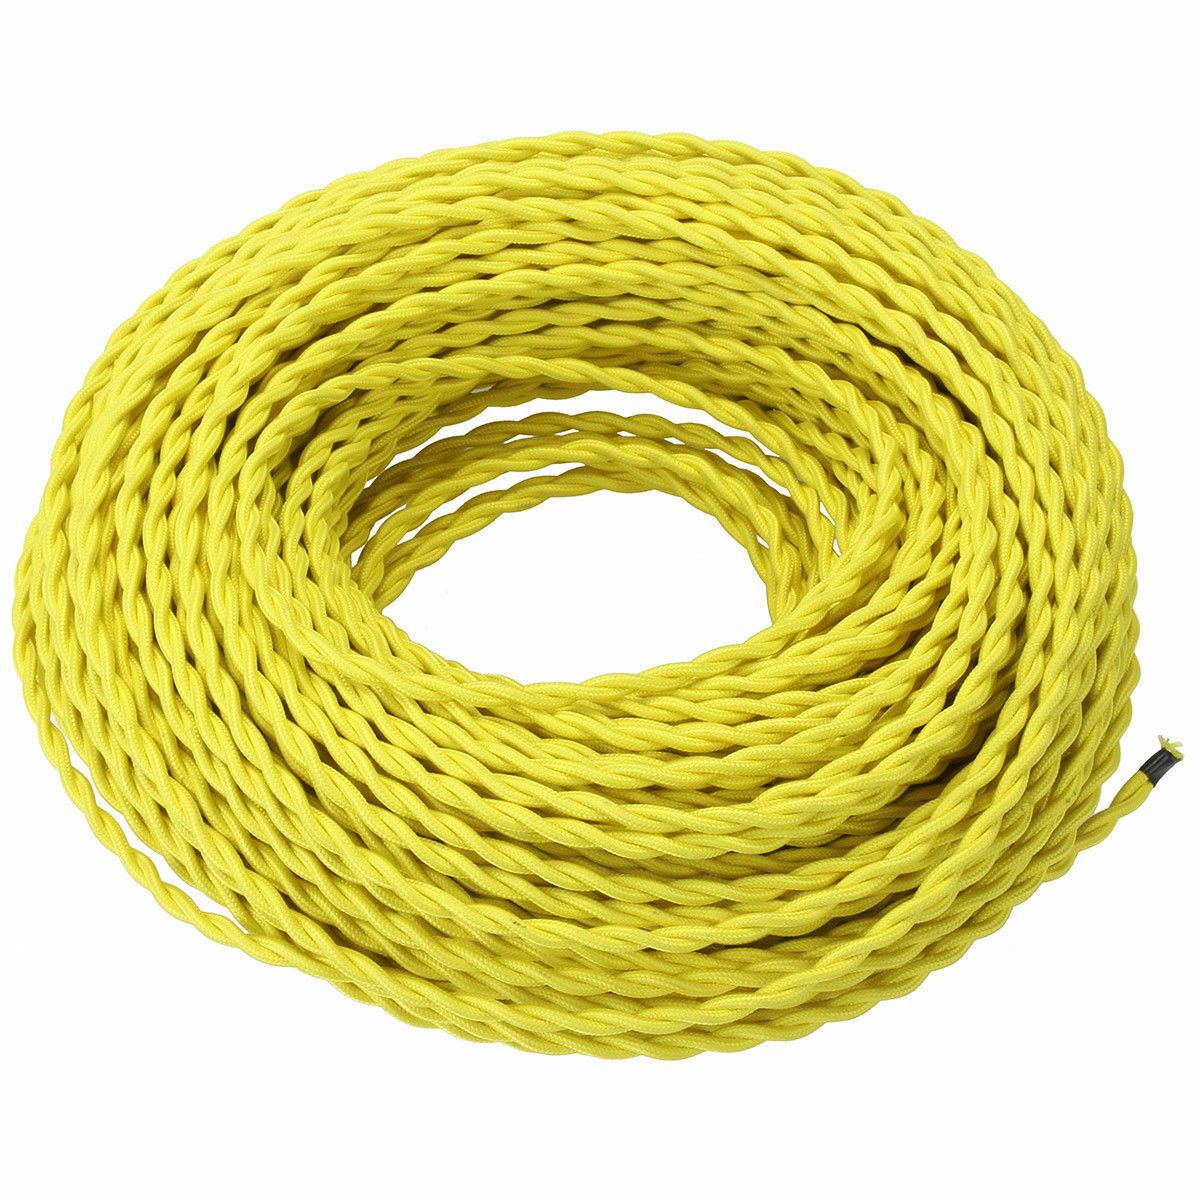 5M Braided Twisted Fabric Cord Will Improve Your Lighting Experience~1716